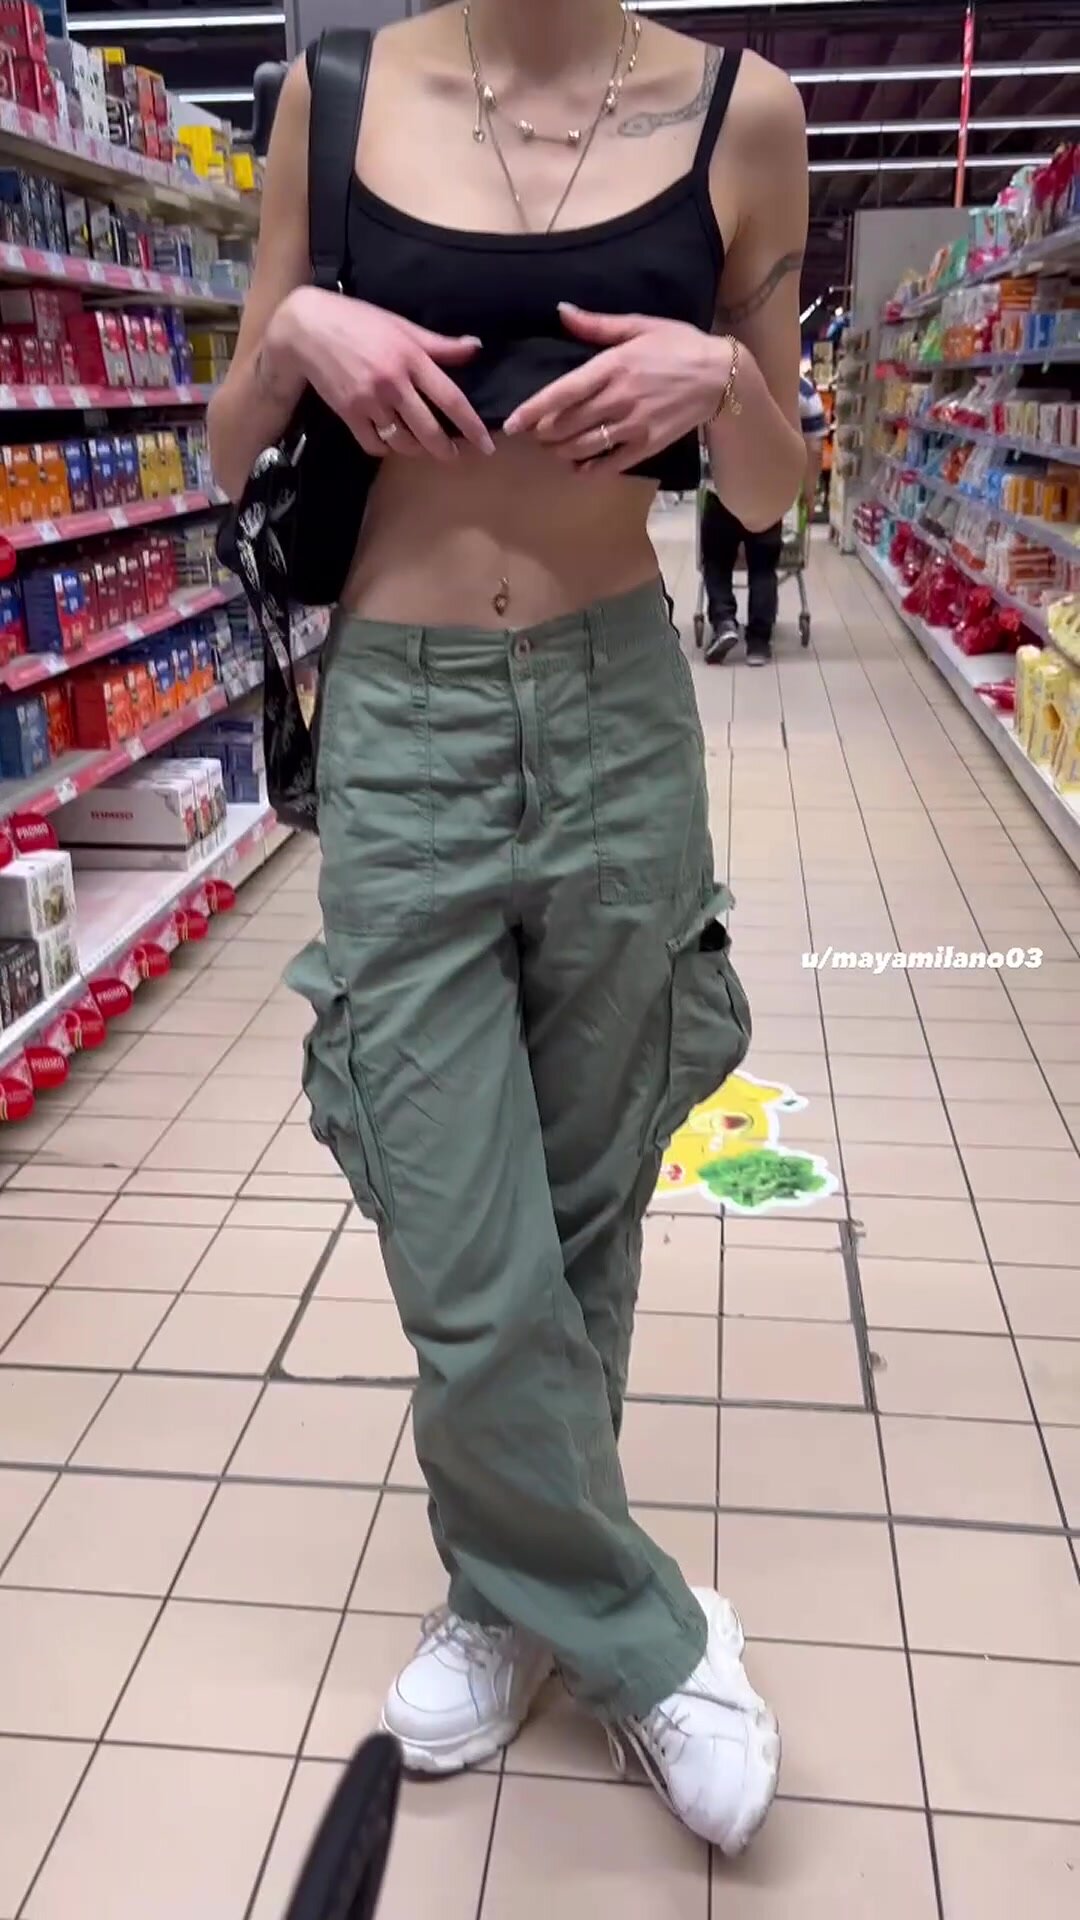 flashing boobs at the supermarket to make ur day better